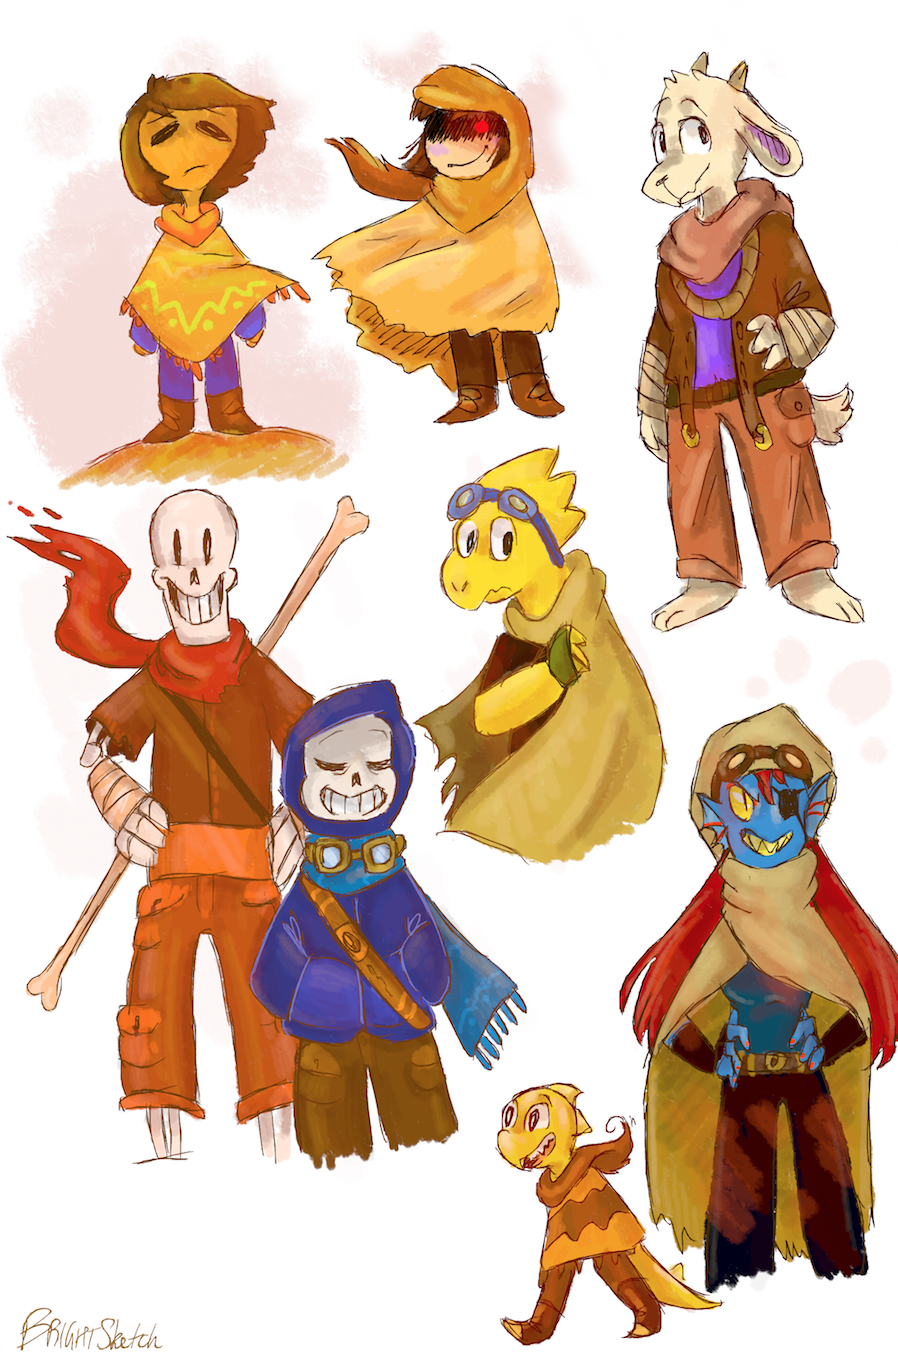 WHAT UNDERTALE AU IS THAT?